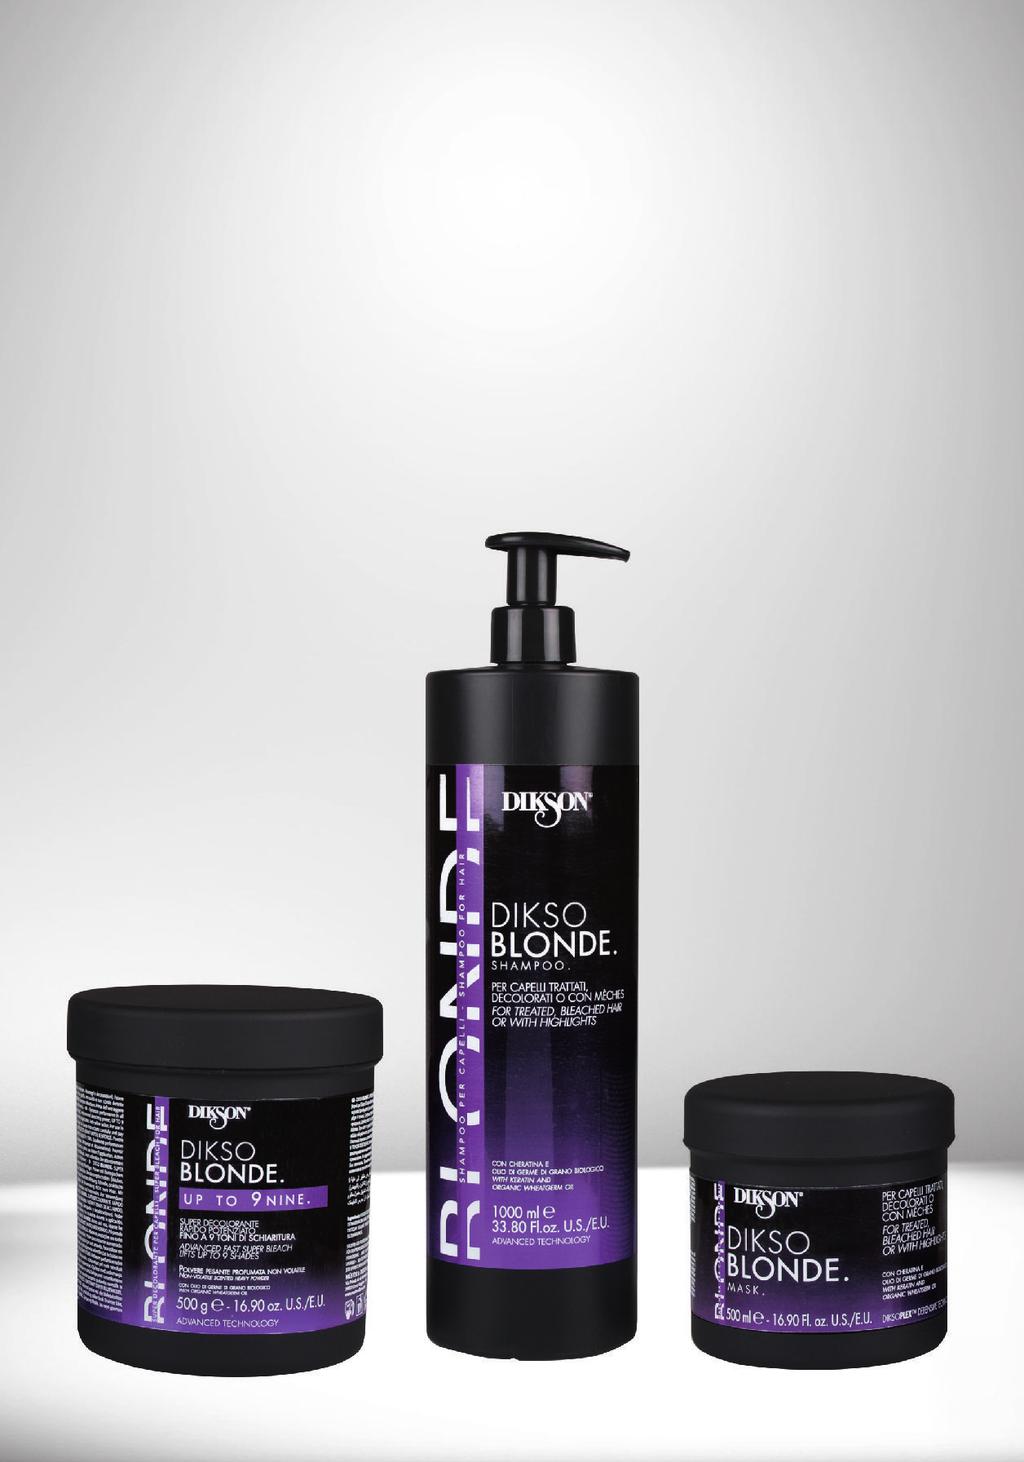 ADVANCED SUPER LIGHTENING TREATMENT To obtain the OPTIMUM LIGHTENING RESULT and the BEST WELLNESS CONDITIONS OF THE HAIR